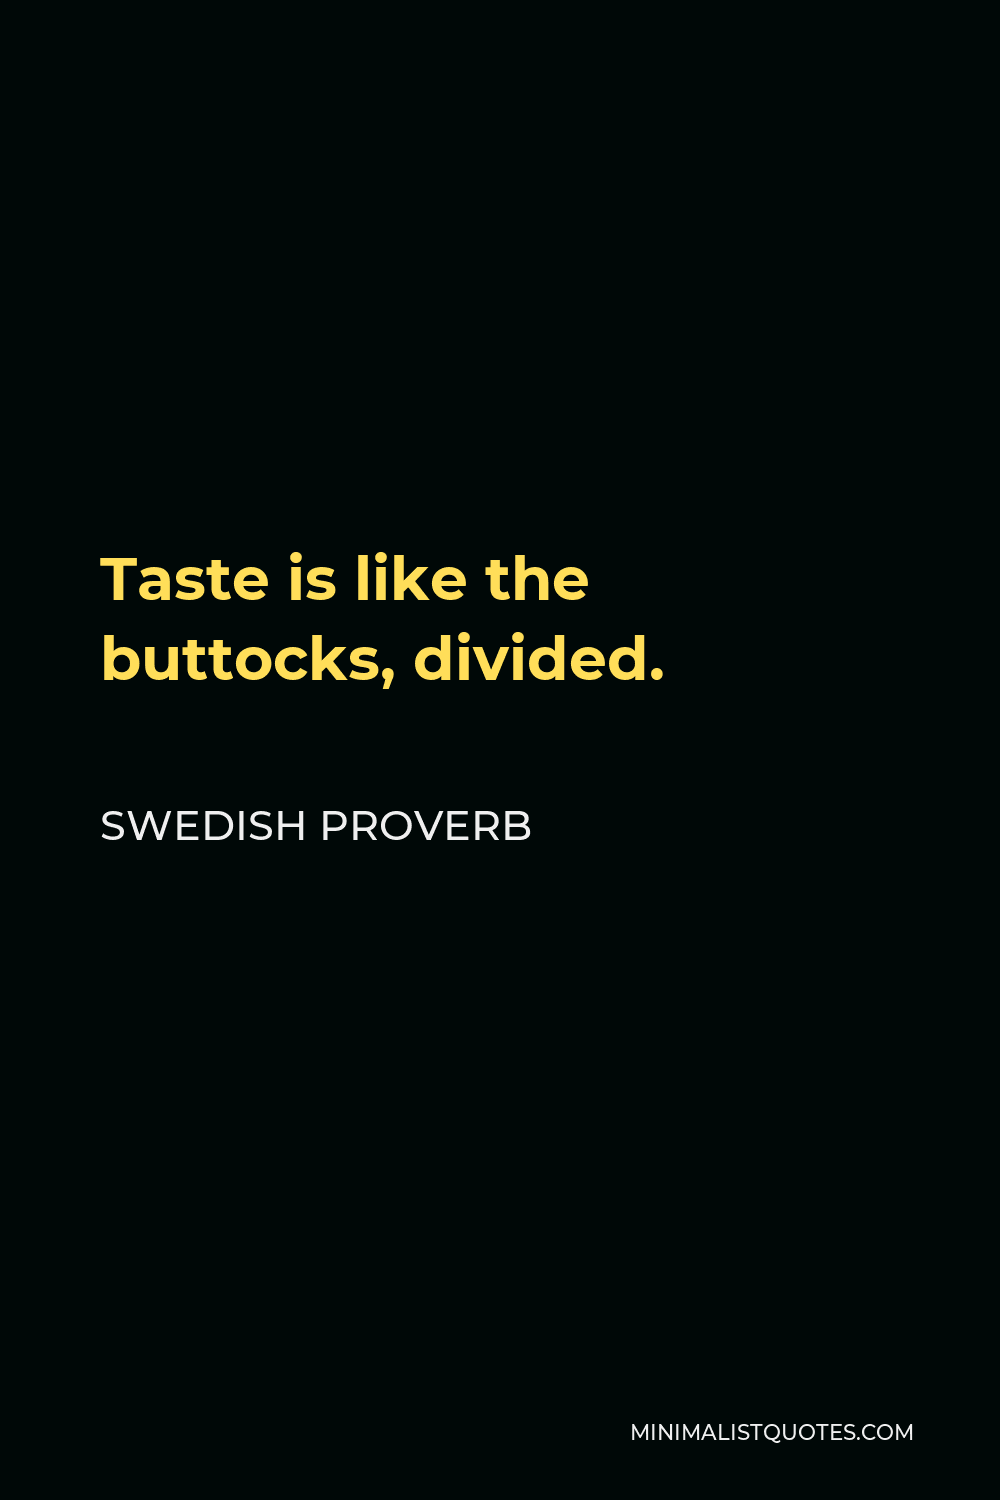 Swedish Proverb Quote - Taste is like the buttocks, divided.